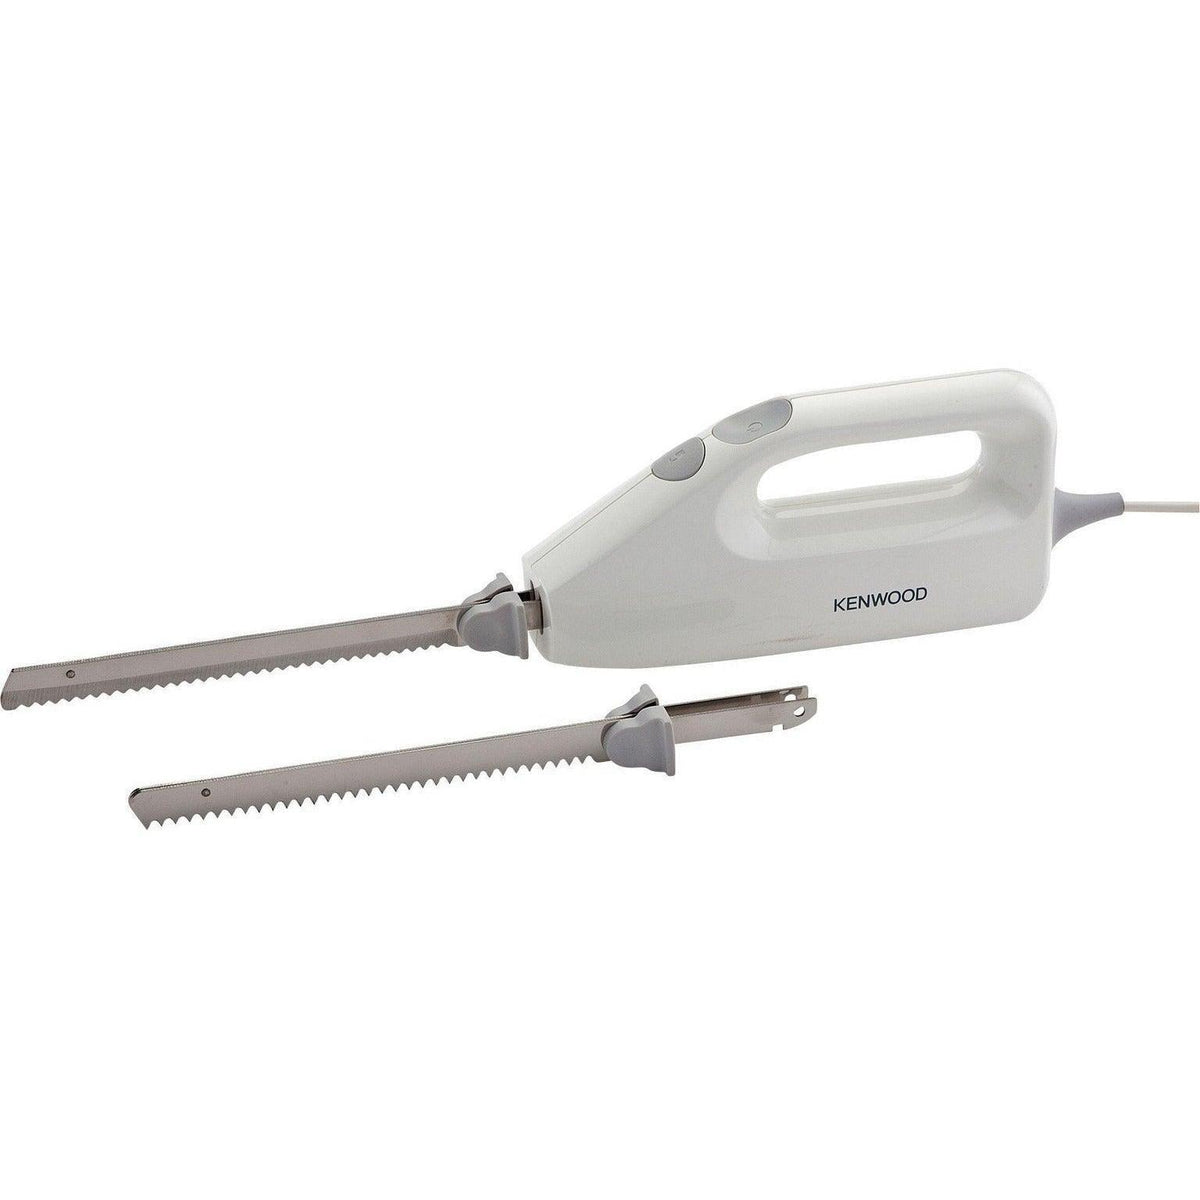 Kenwood Electric Carving Knife - White | KN650 from DID Electrical - guaranteed Irish, guaranteed quality service. (6890741235900)